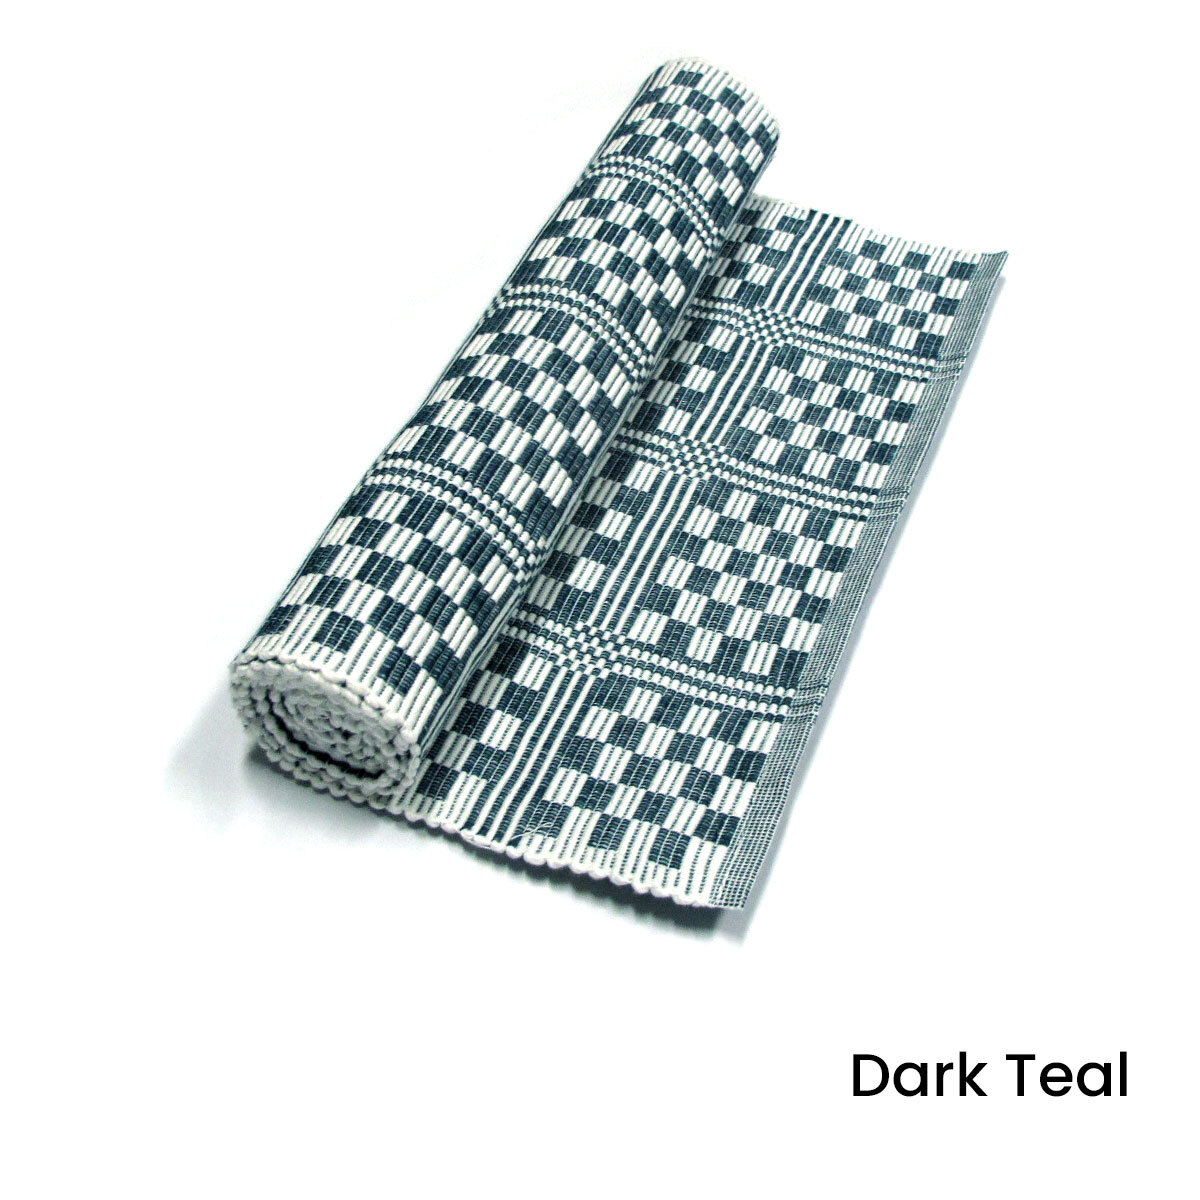 Checkered Cotton Ribbed Table Runner 33 x 150 cm Dark Teal